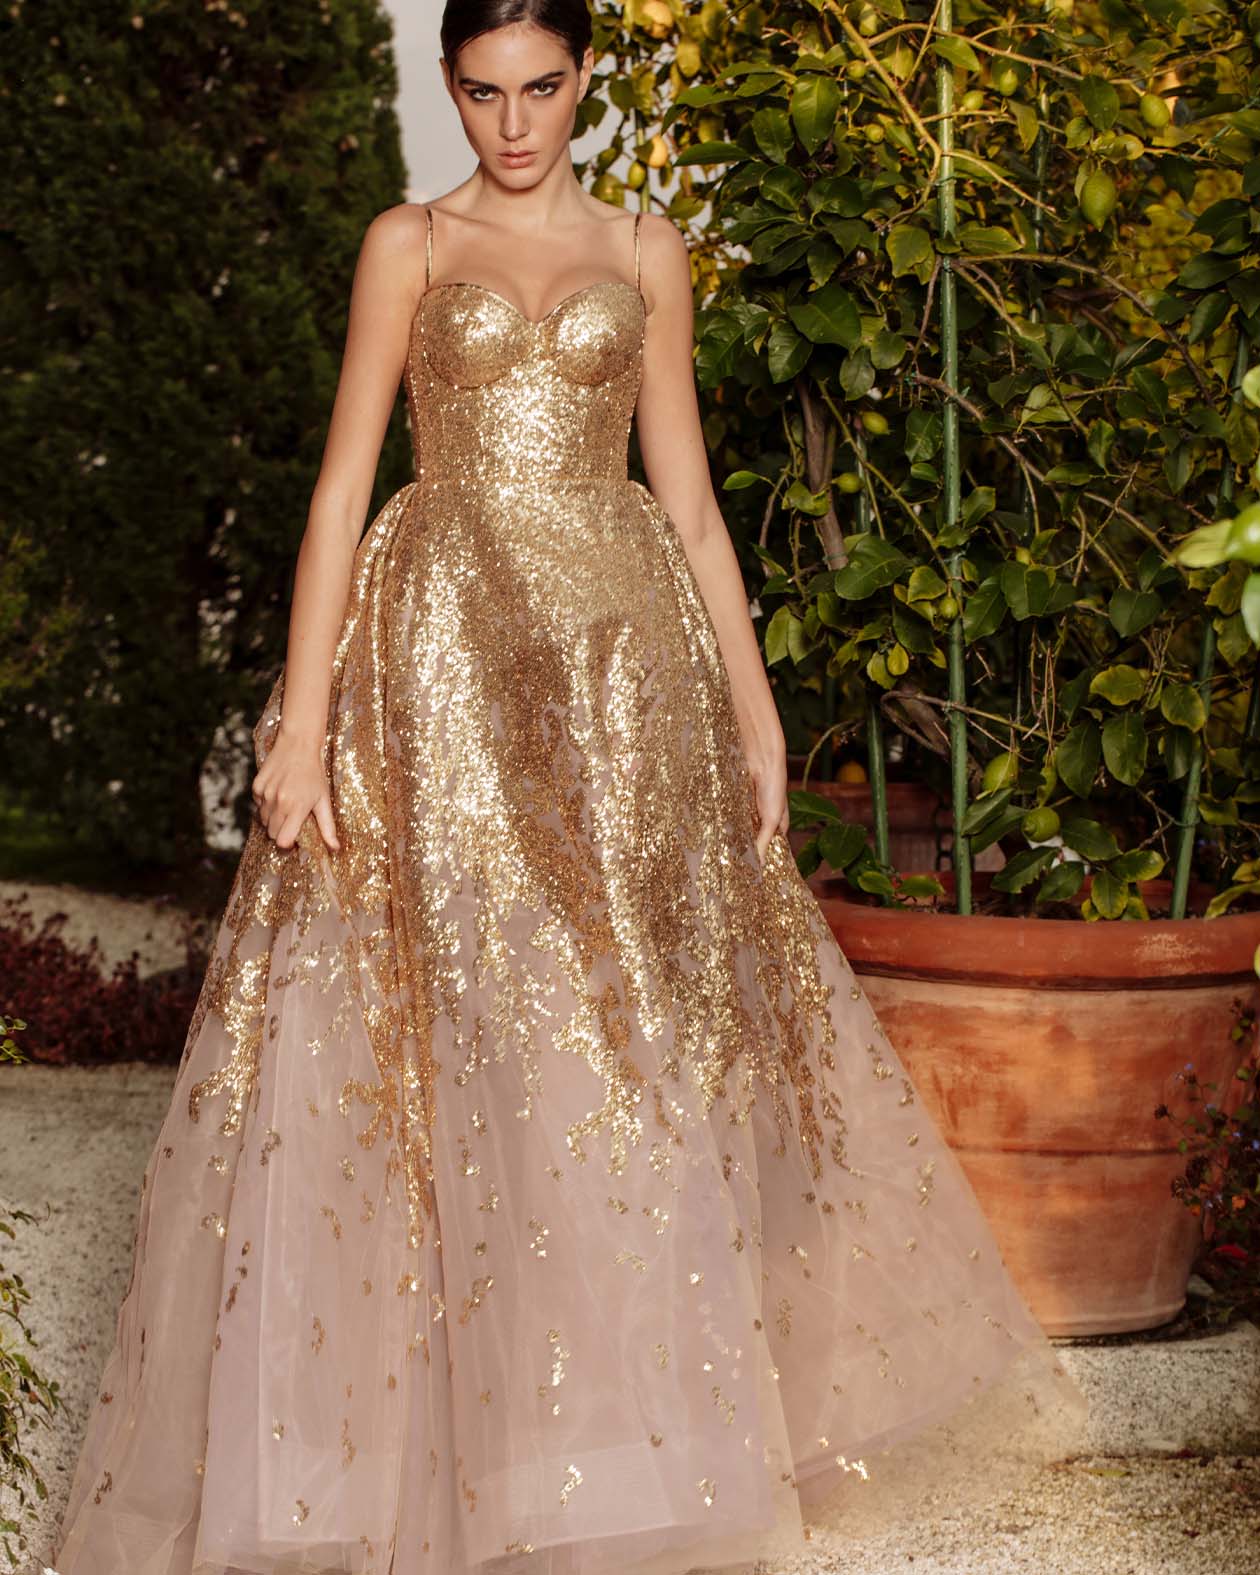 Don't miss the stunning golden gown at this industrial shoot | Yellow  wedding dress, Golden gown, Ball gowns wedding